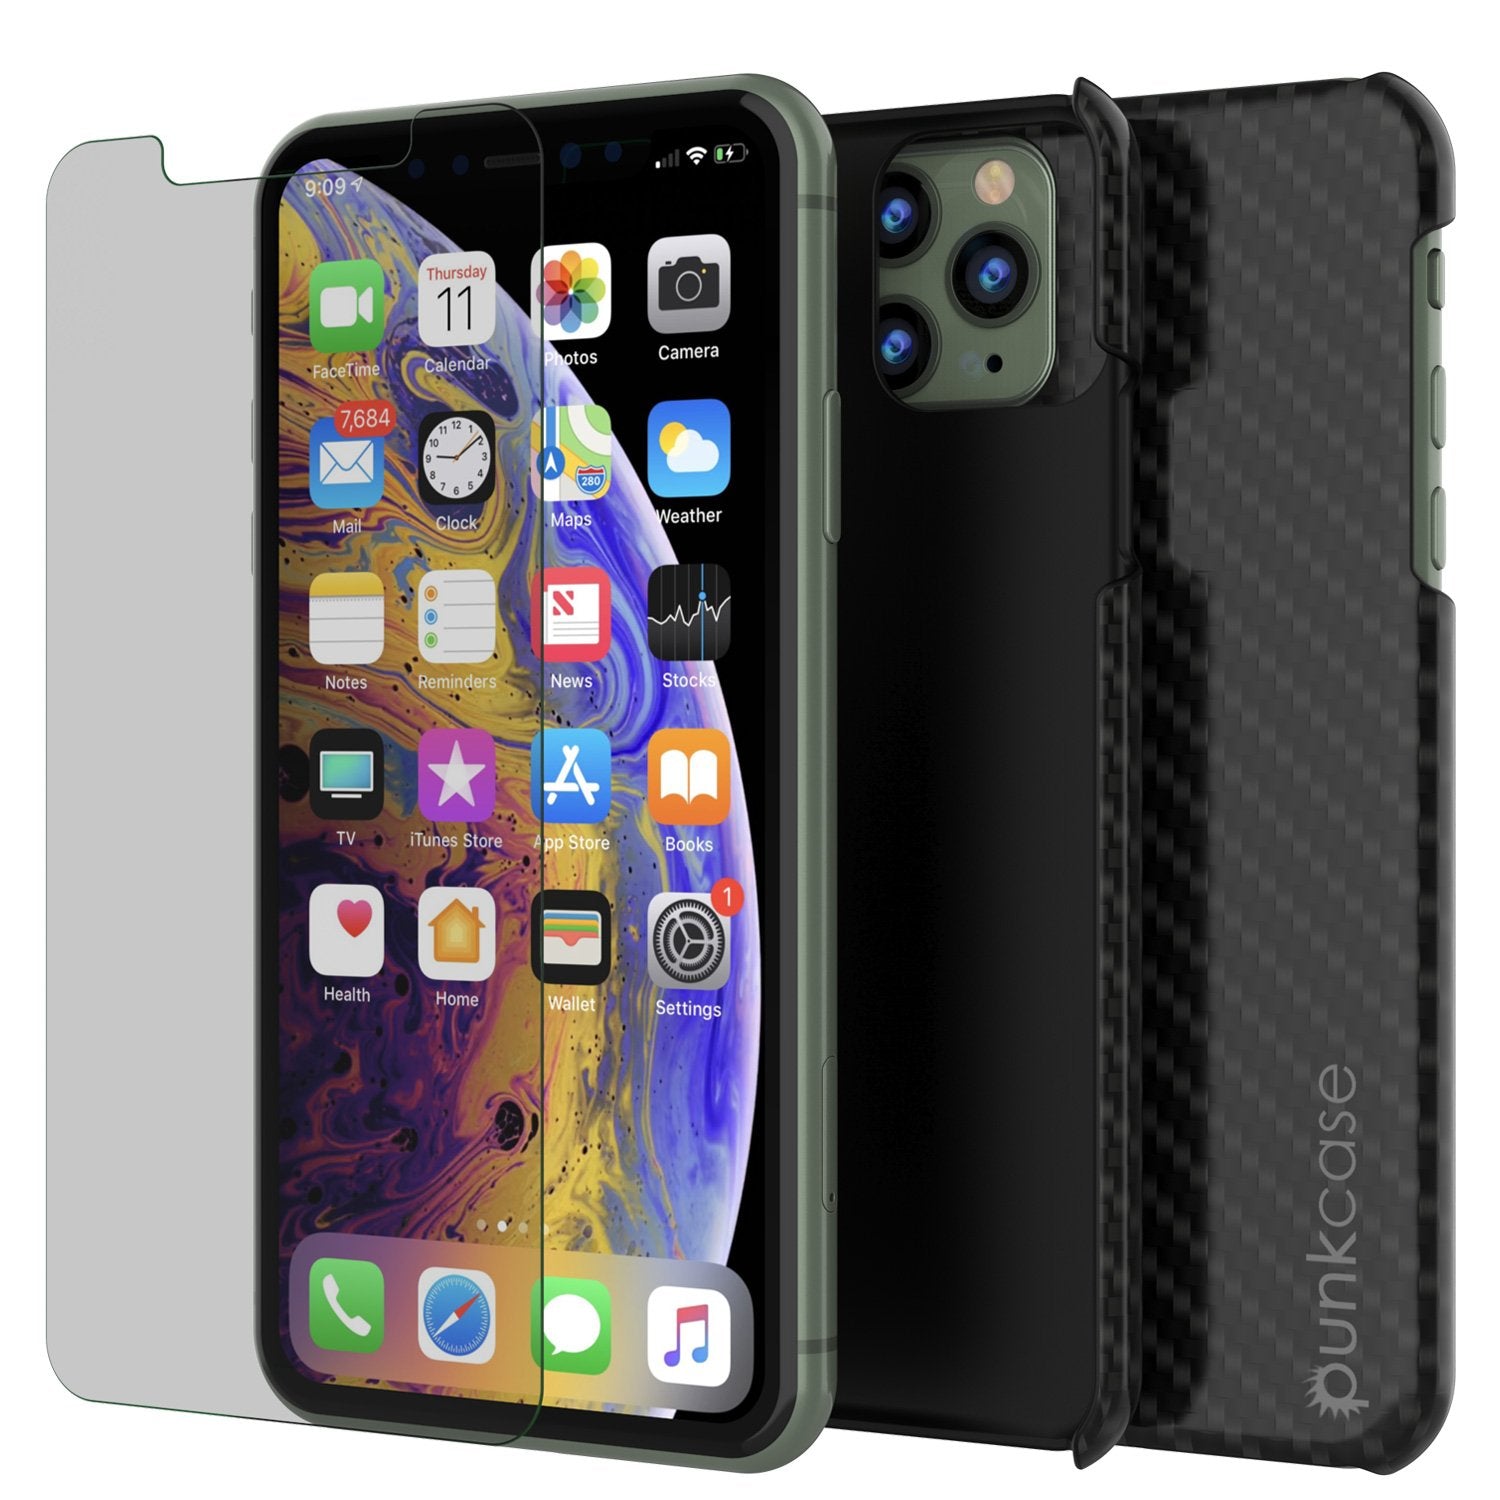 iPhone 11 Pro Case, Punkcase CarbonShield, Heavy Duty & Ultra Thin 2 Piece Dual Layer [shockproof]